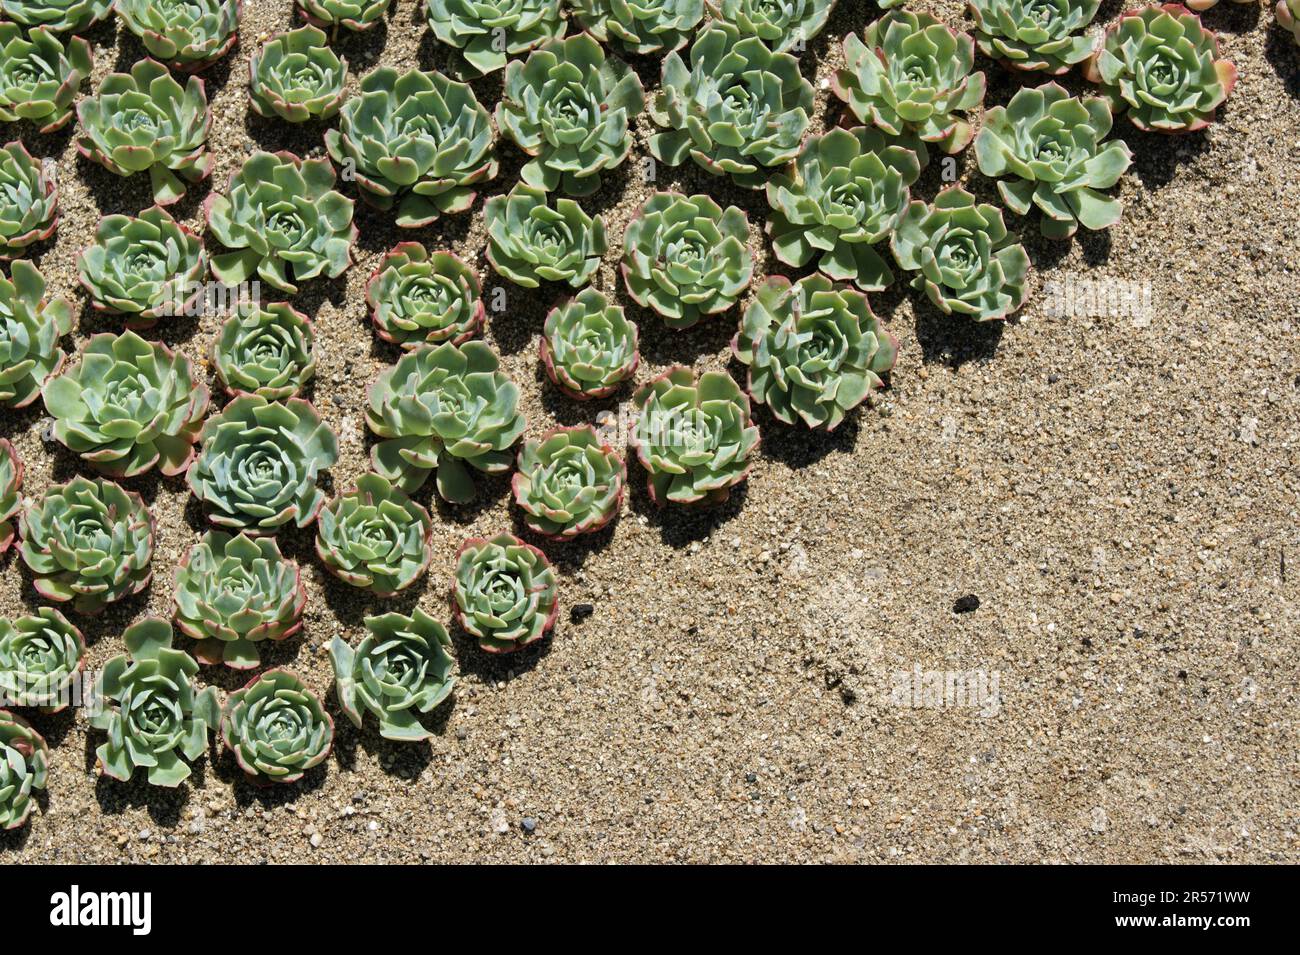 Decorative plants. Succulents in a sandy bed on a sunny day. Stock Photo